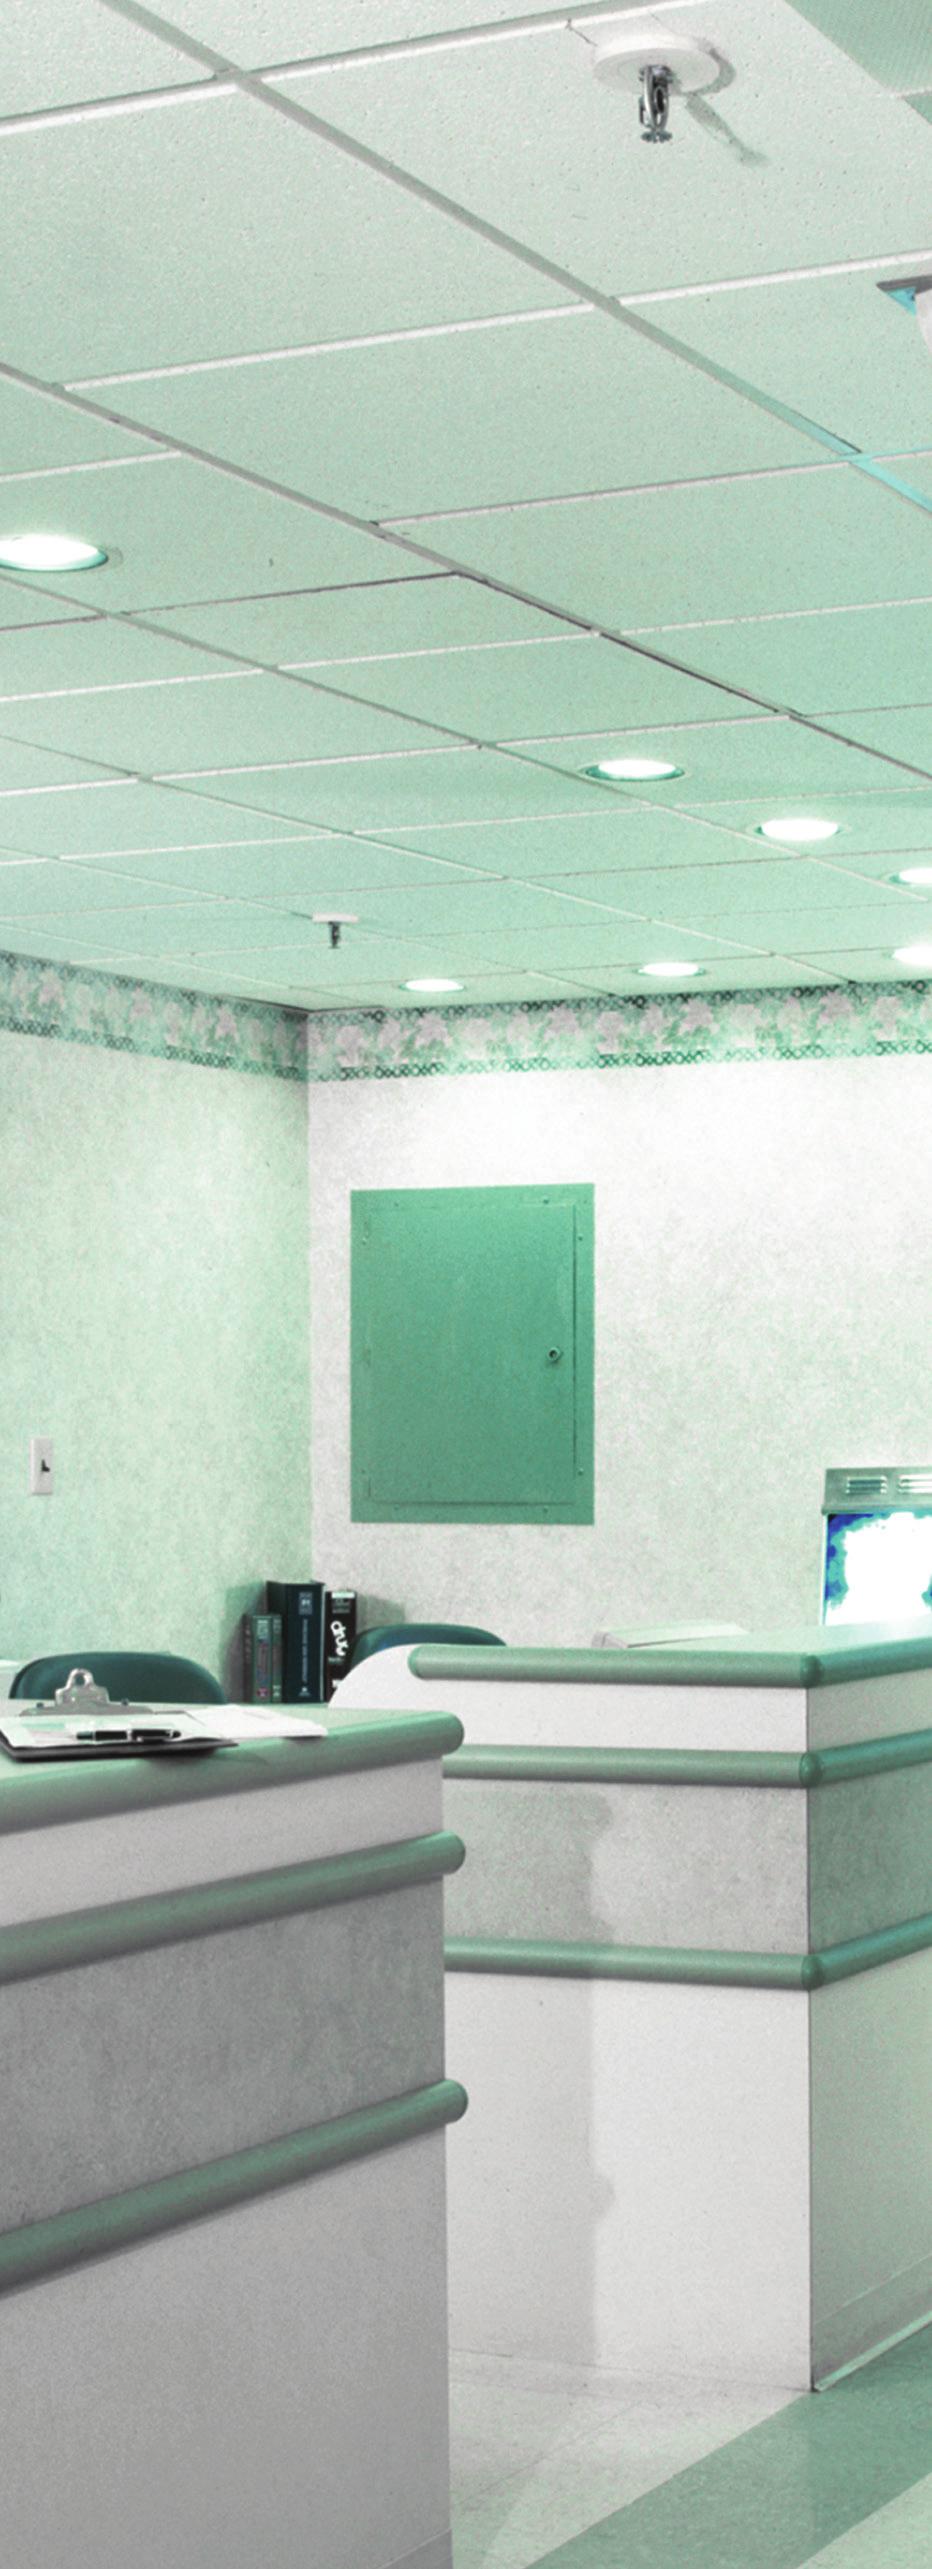 Introduction General Cable understands that hospitals require complex buiding designs that must address a wide range of systems and applications.